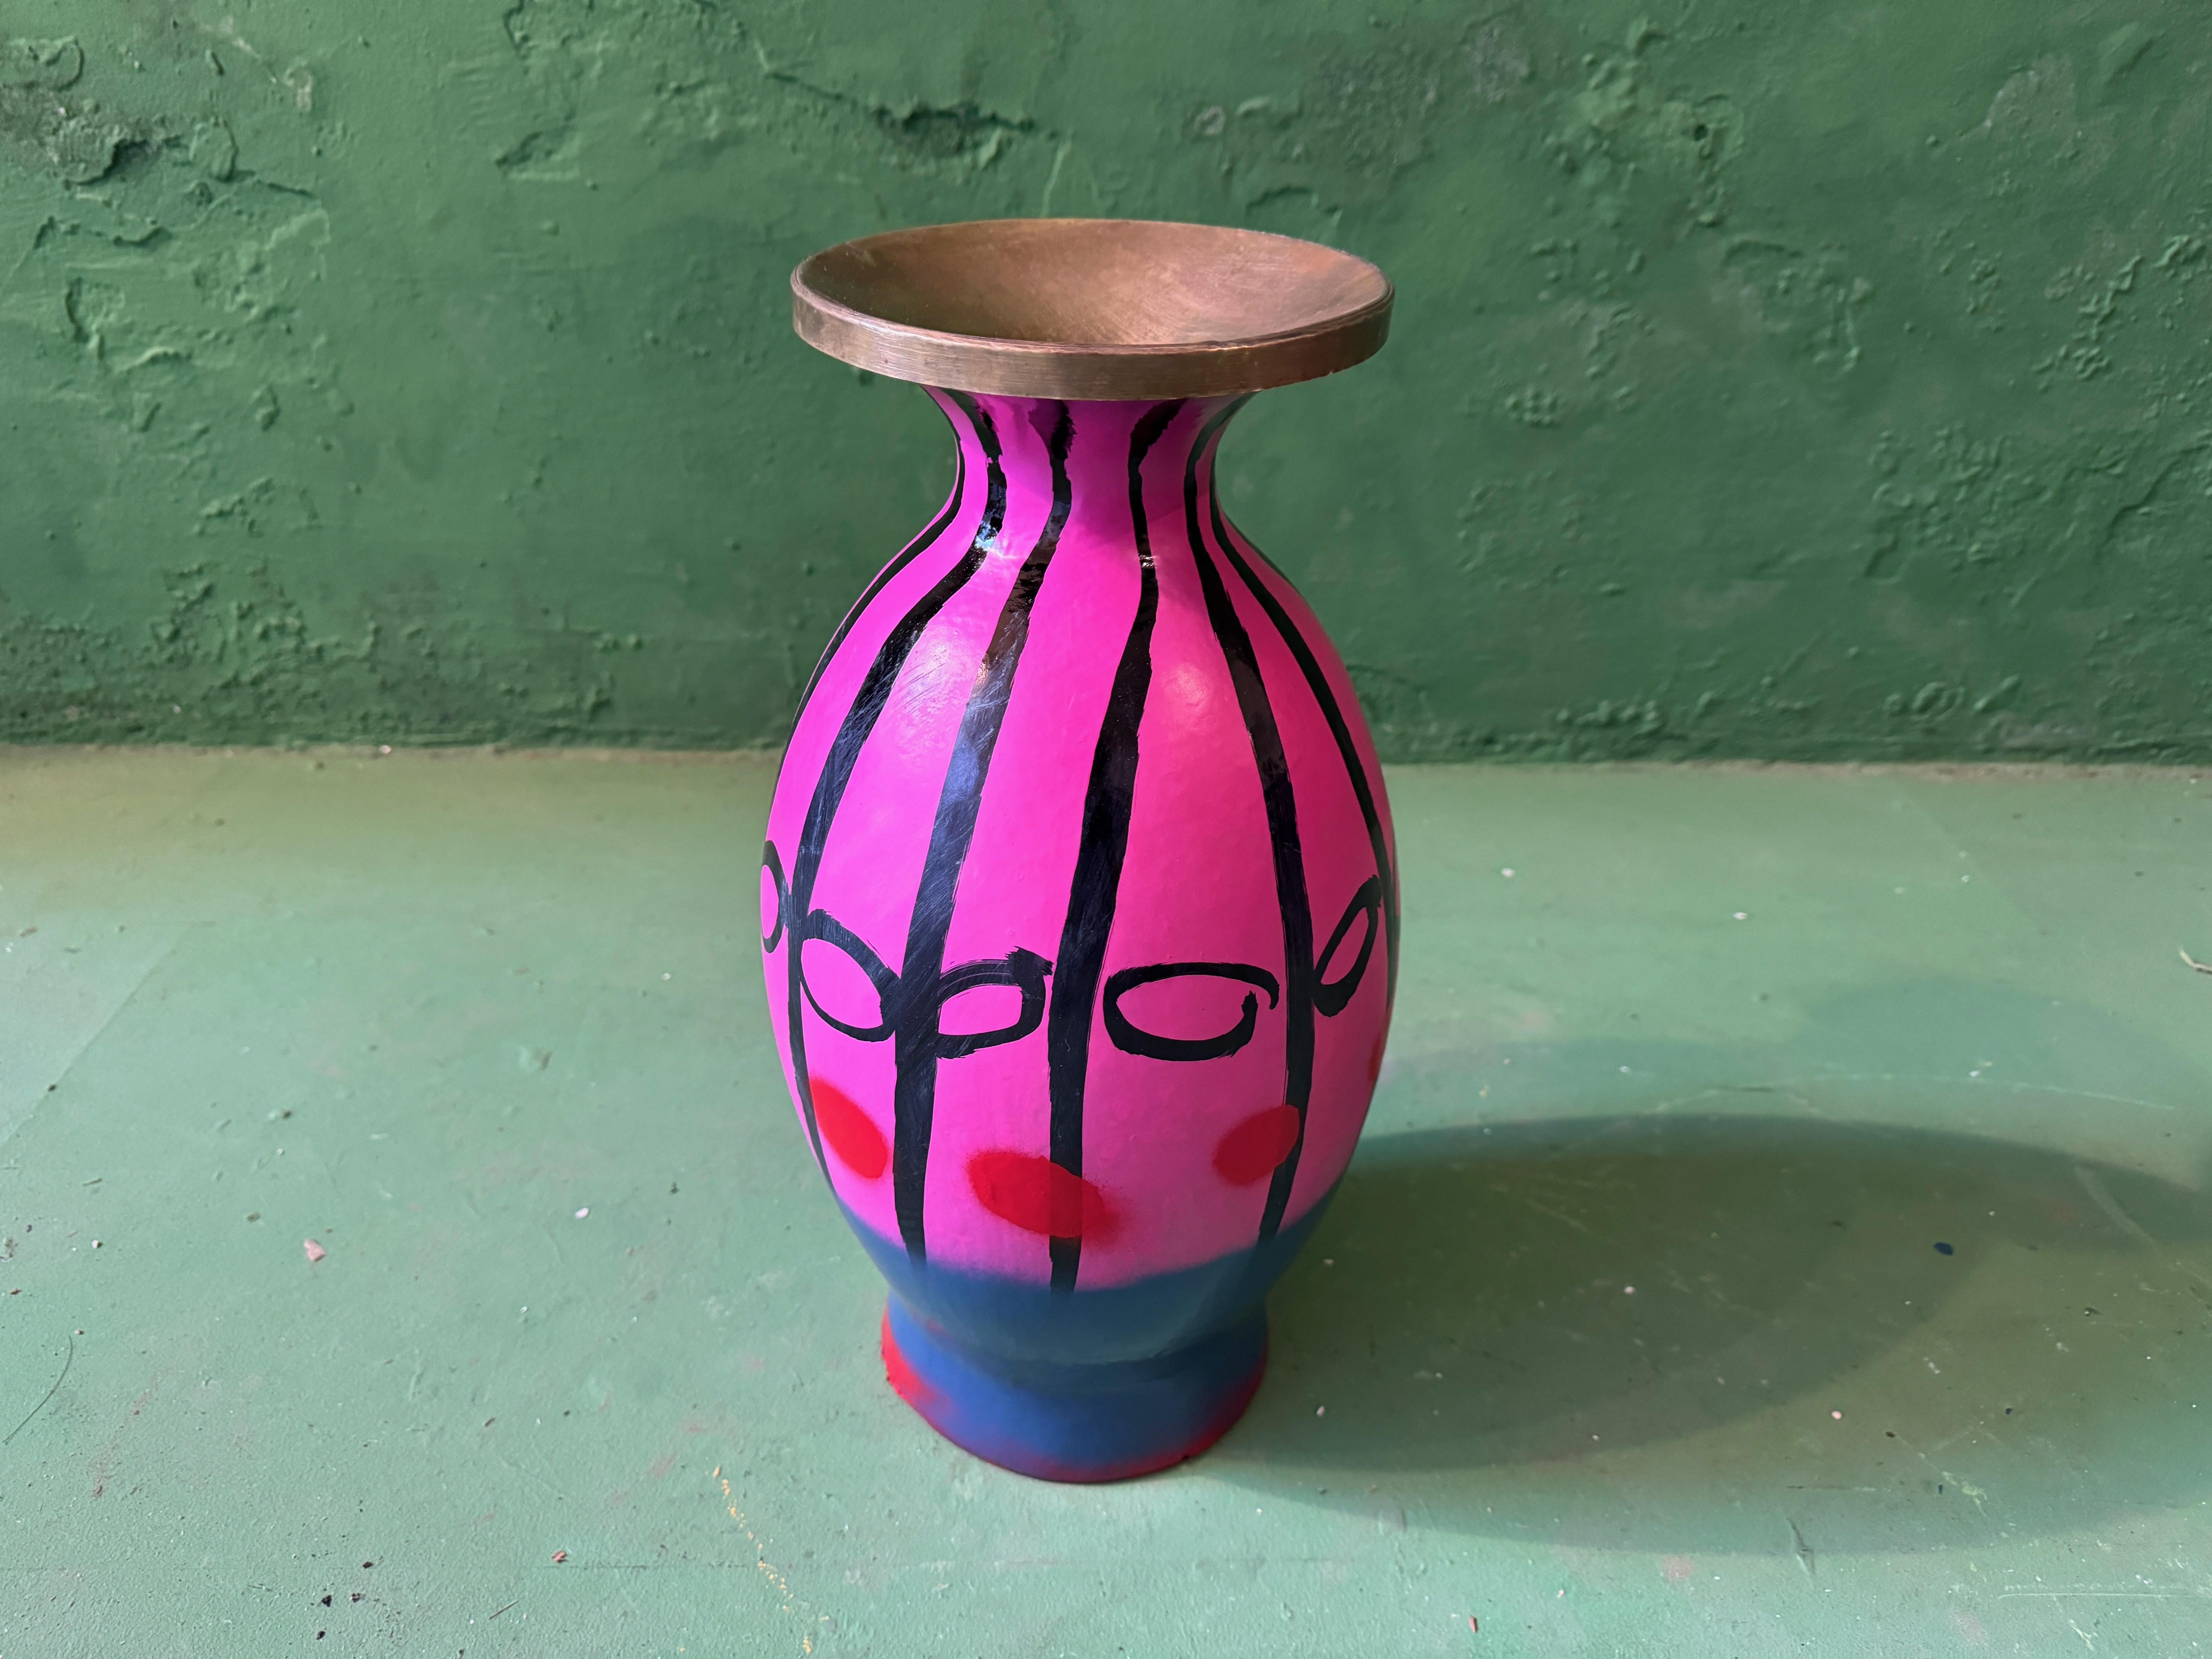 Indian paper Mache Vase with a brass inlay for your flowers in the morning.

Painted by the artist

Dutch workchair, ceramic backrest added, painted and multi lacquered. Adjustable.

•	Info about Markus
•	born 1964 in Aschaffenburg, Germany
•	since 